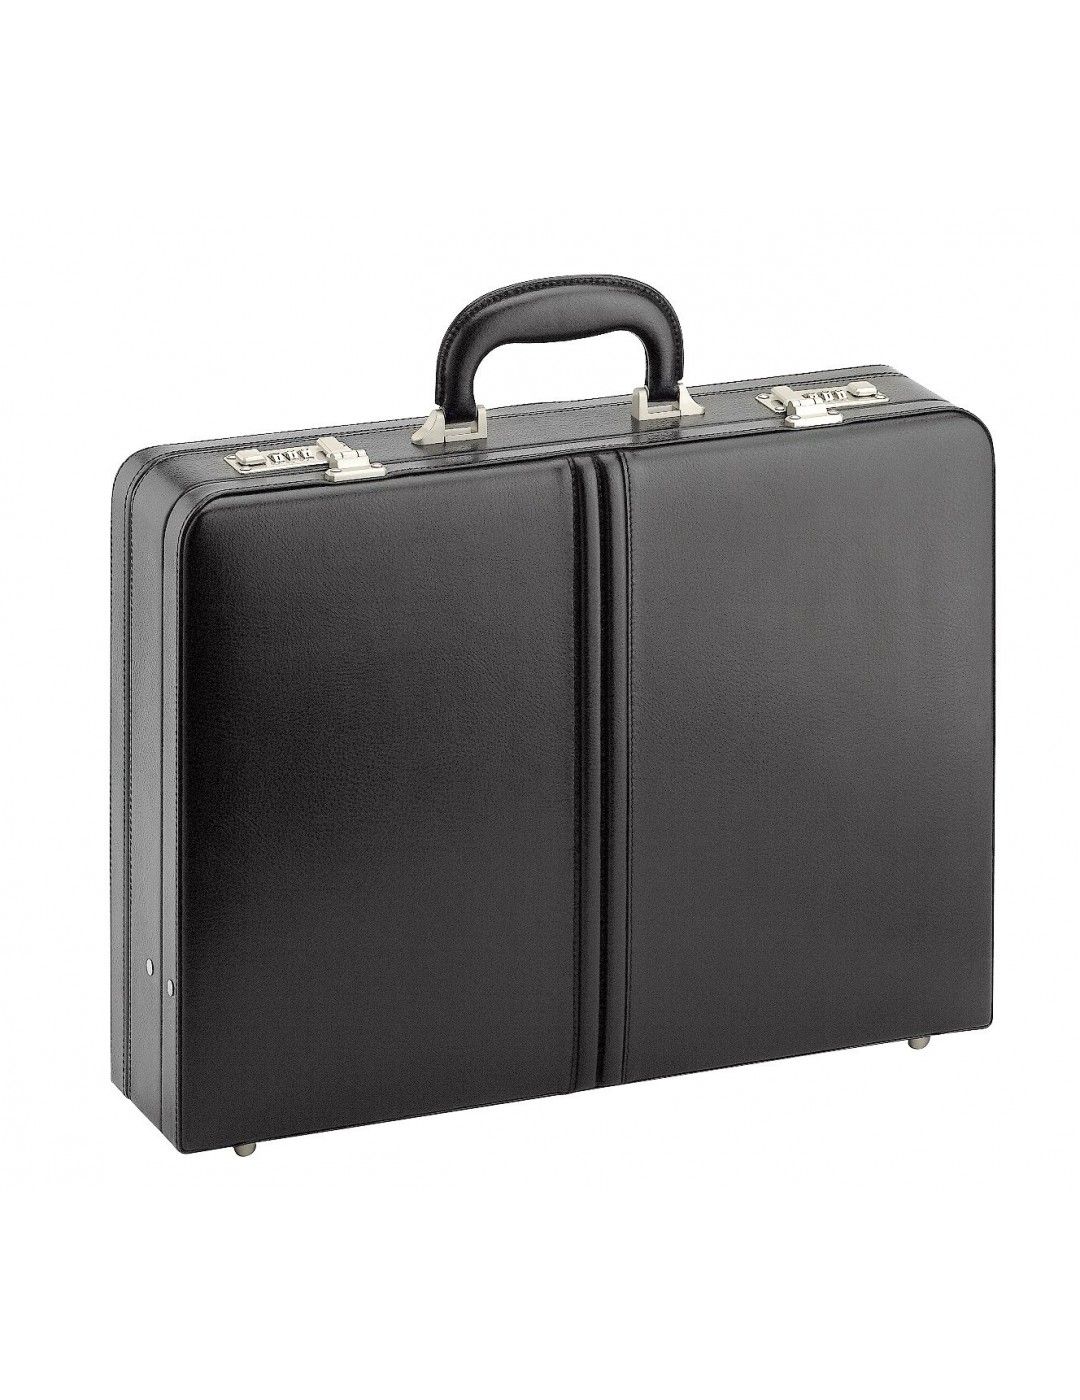 D & N briefcase leather 2667